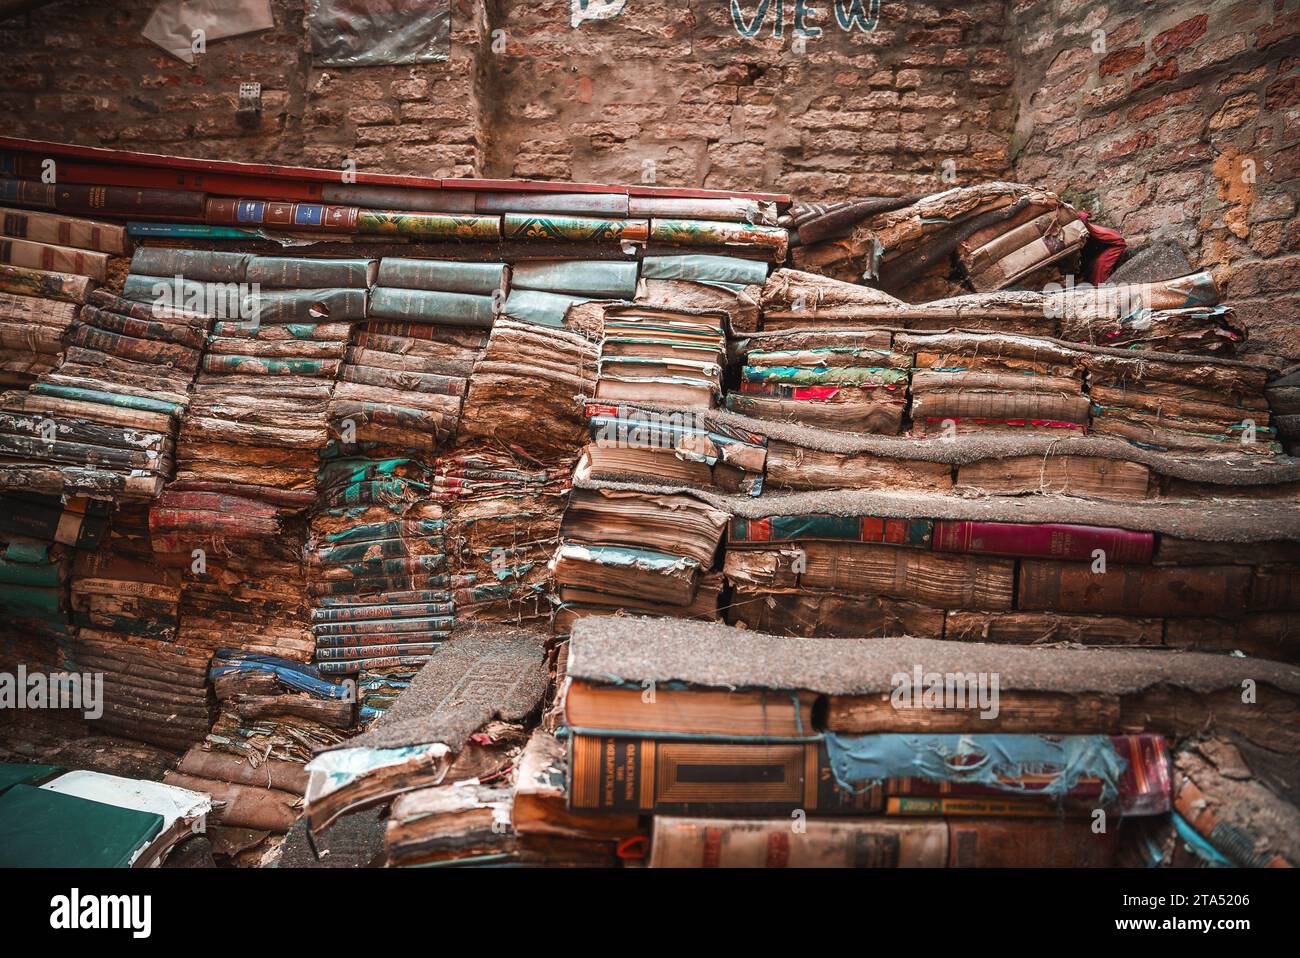 Vintage books in disarray in dimly lit, cozy room with warm sunlight streaming through window Stock Photo